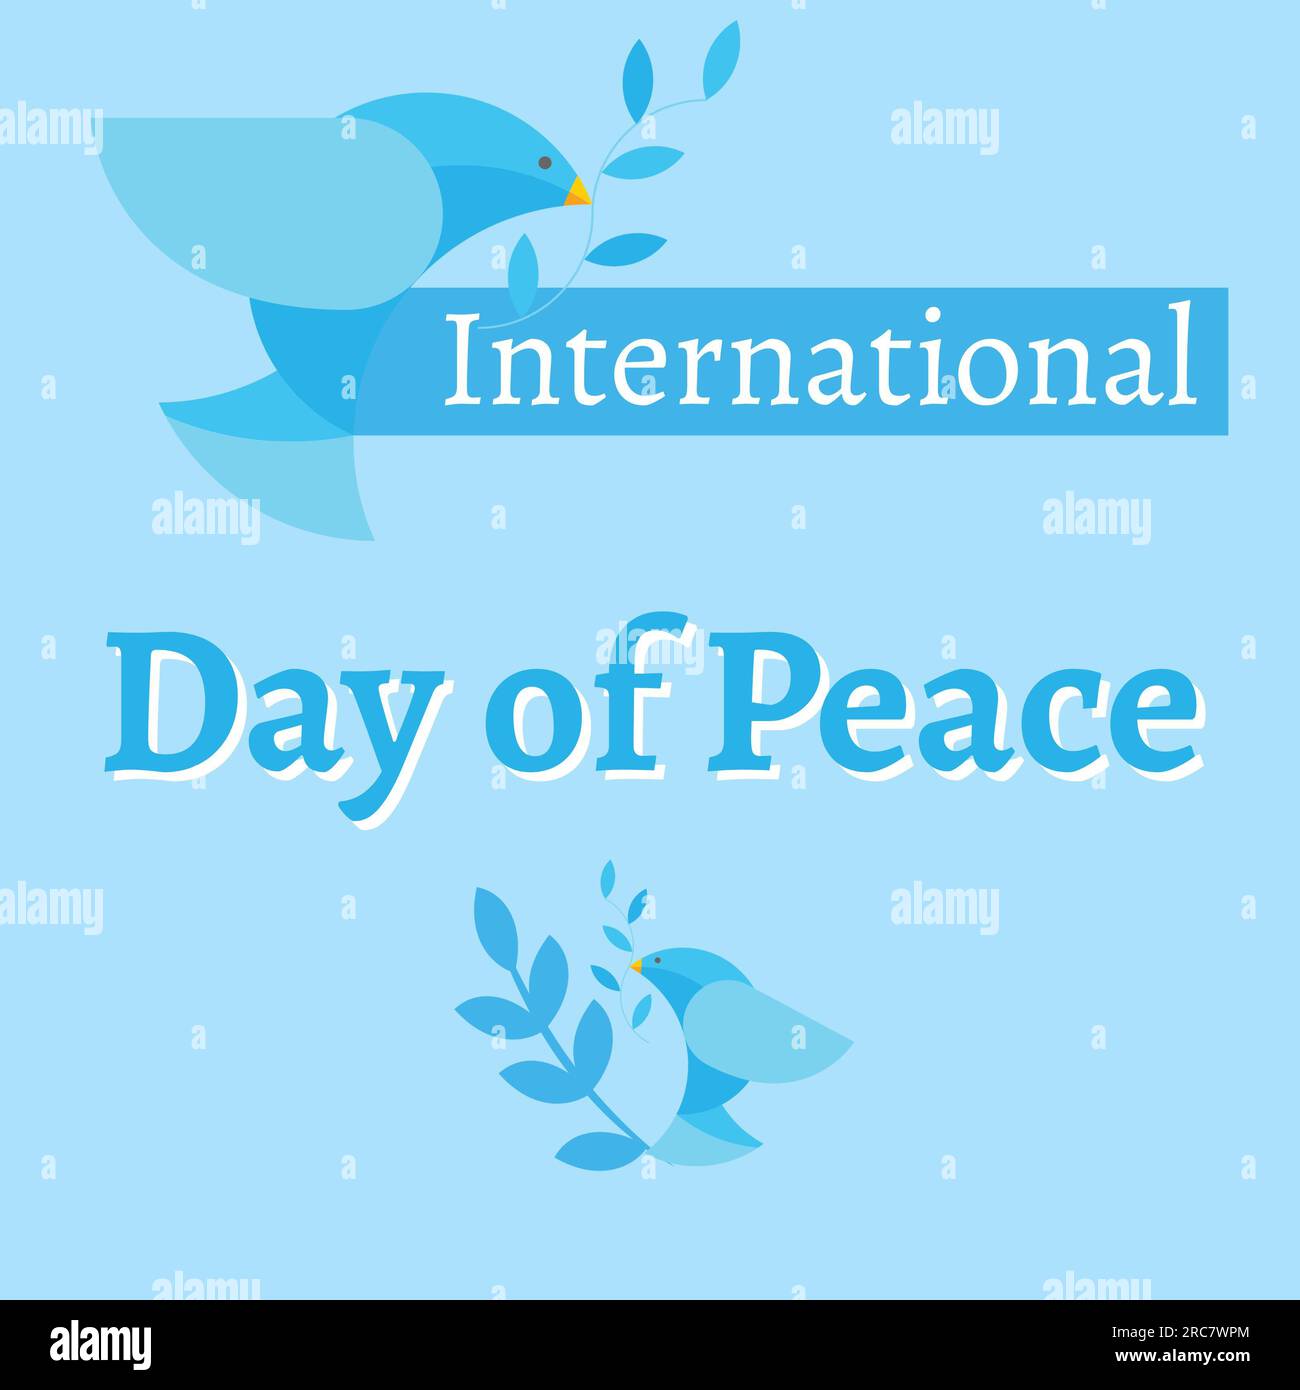 International day of peace text with two doves holding olive branches on blue background Stock Photo